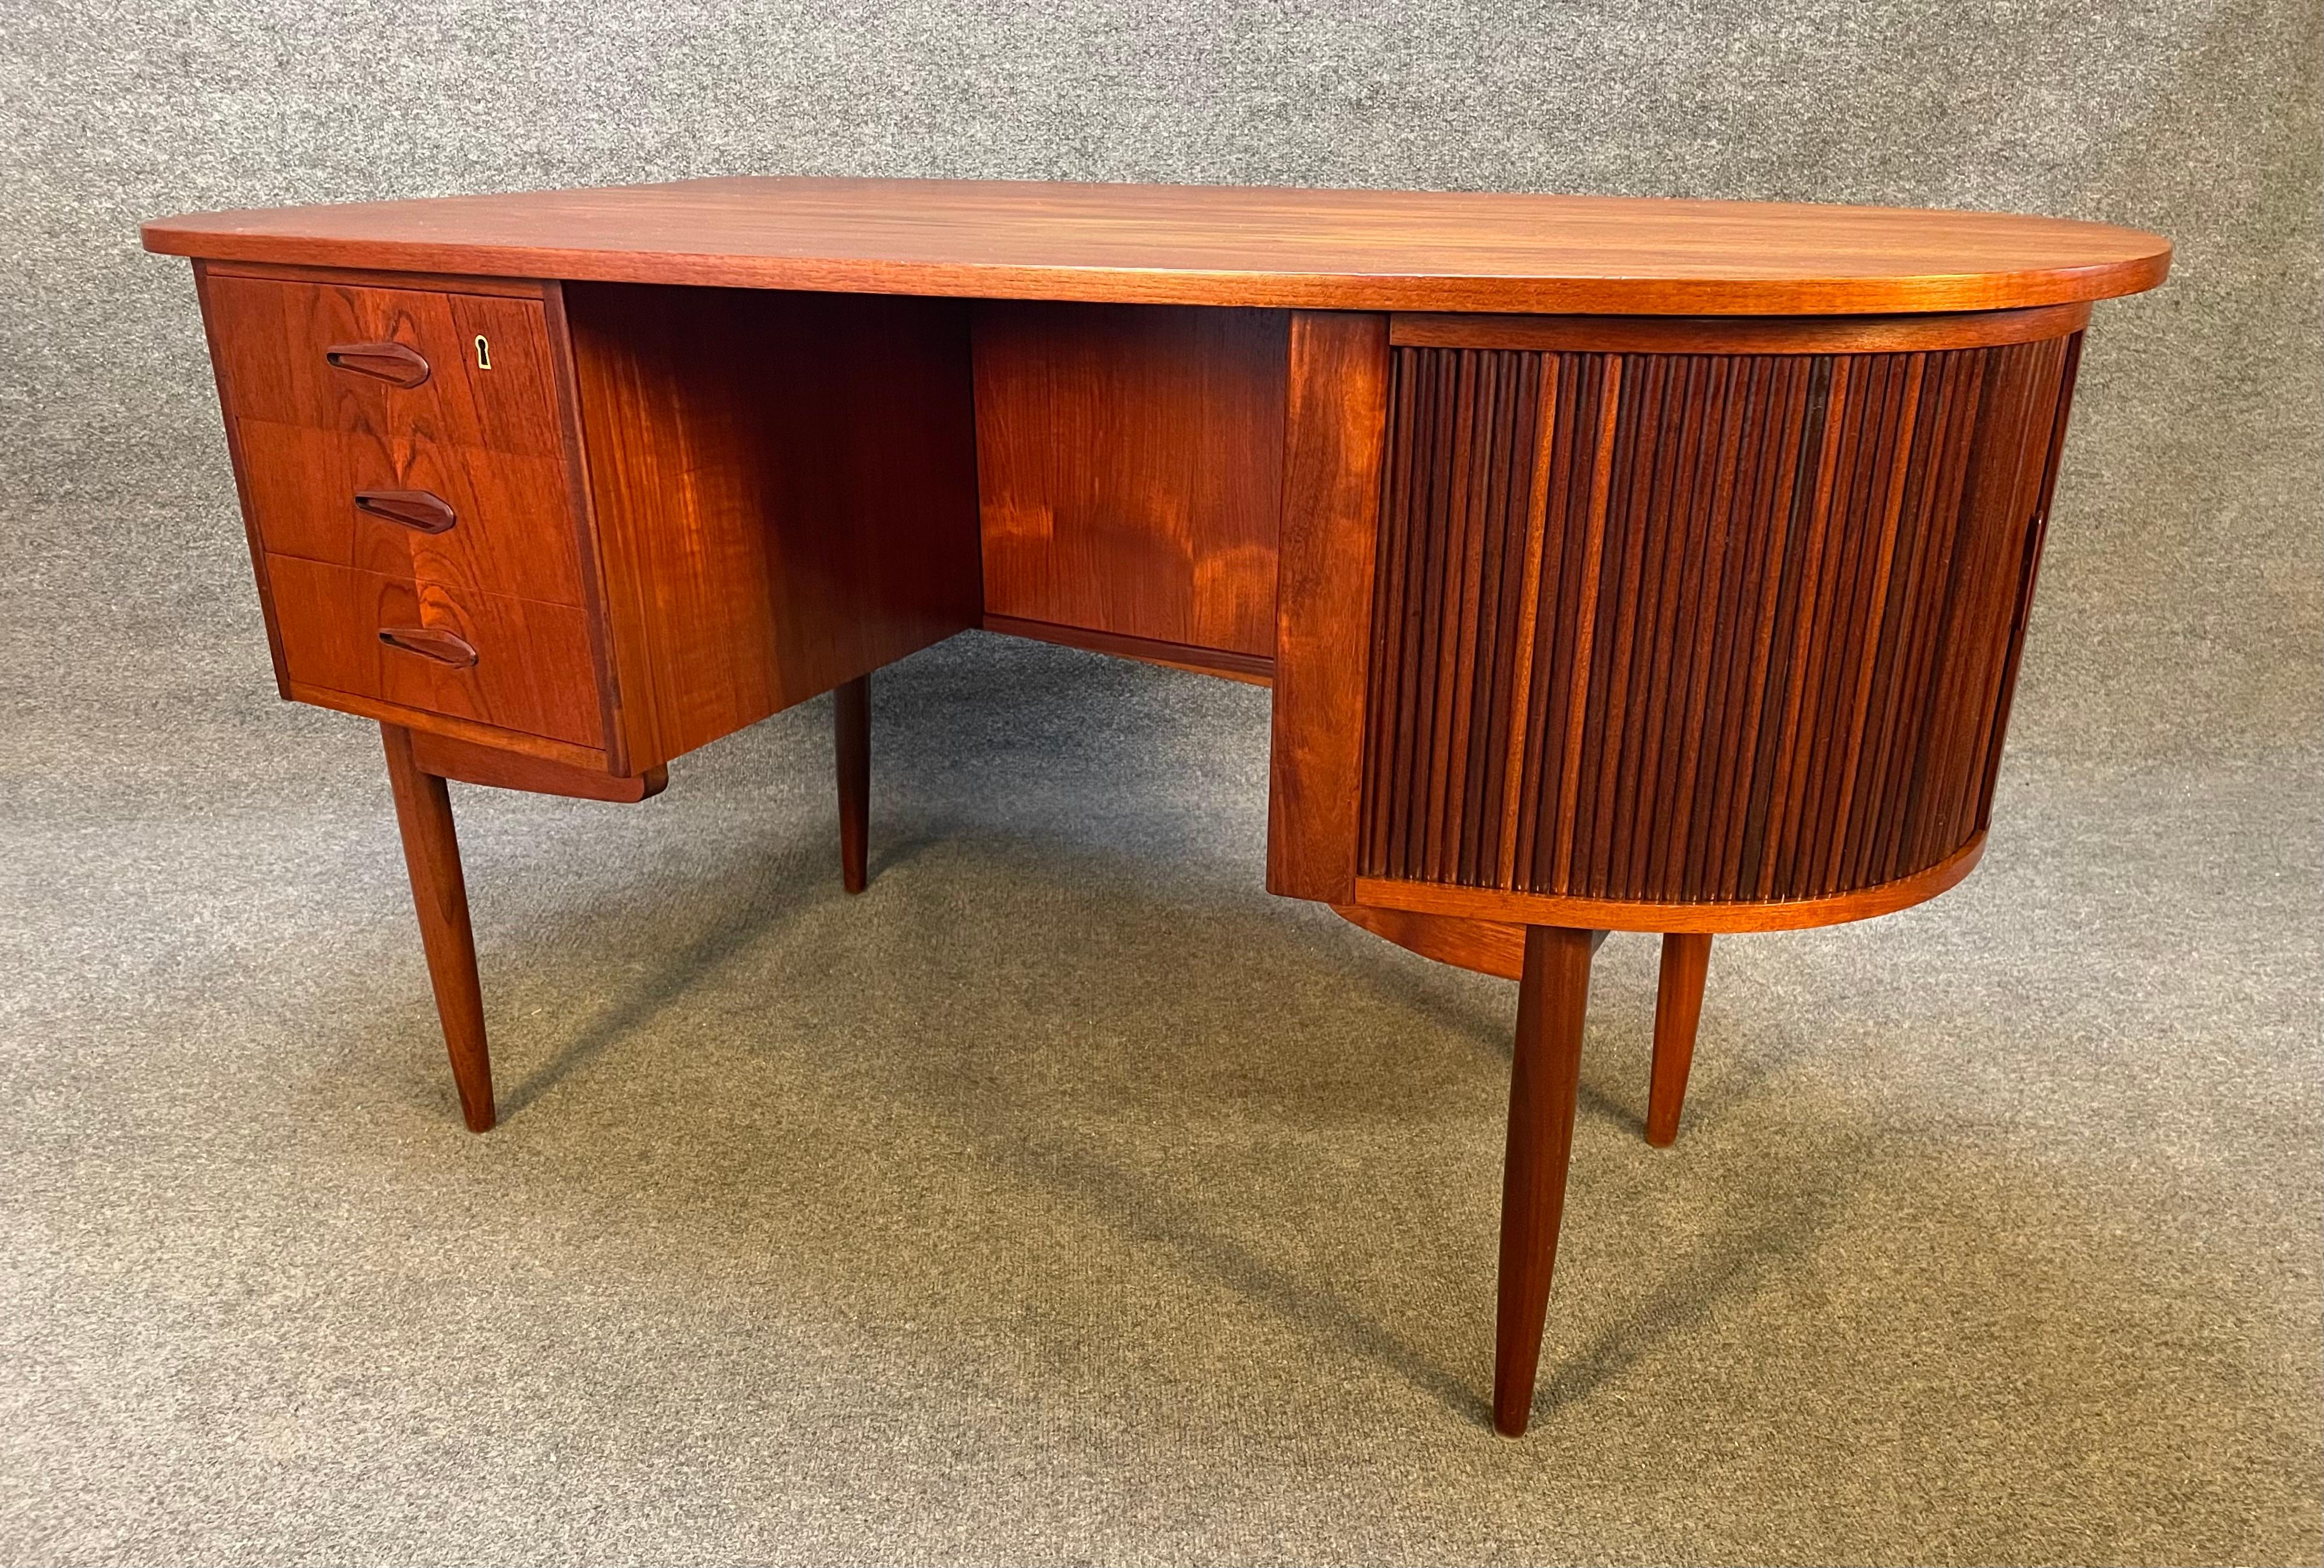 Here is a beautiful scandinavian modern desk in teak manufactured in Denmark in the 1960's which design is reminiscent of Kai Kristiansen.
This special desk, recently imported from Europe to California before its refinishing, features a